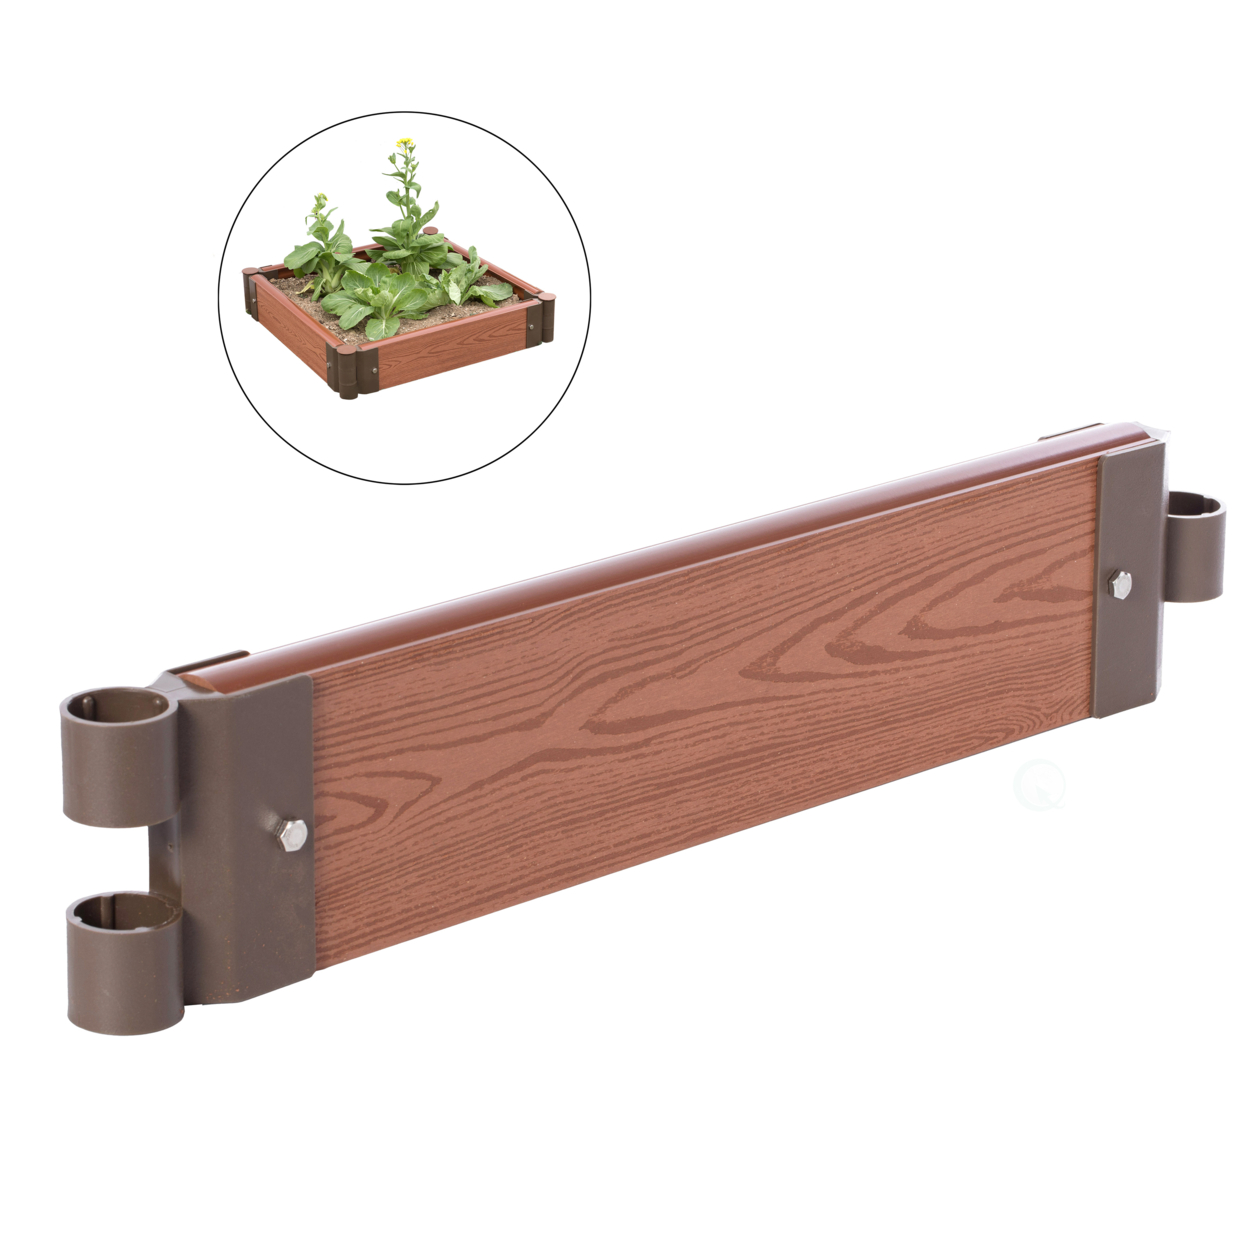 Classic Traditional Durable Wood- Look Raised Outdoor Garden Bed Flower Planter Box - Small Single